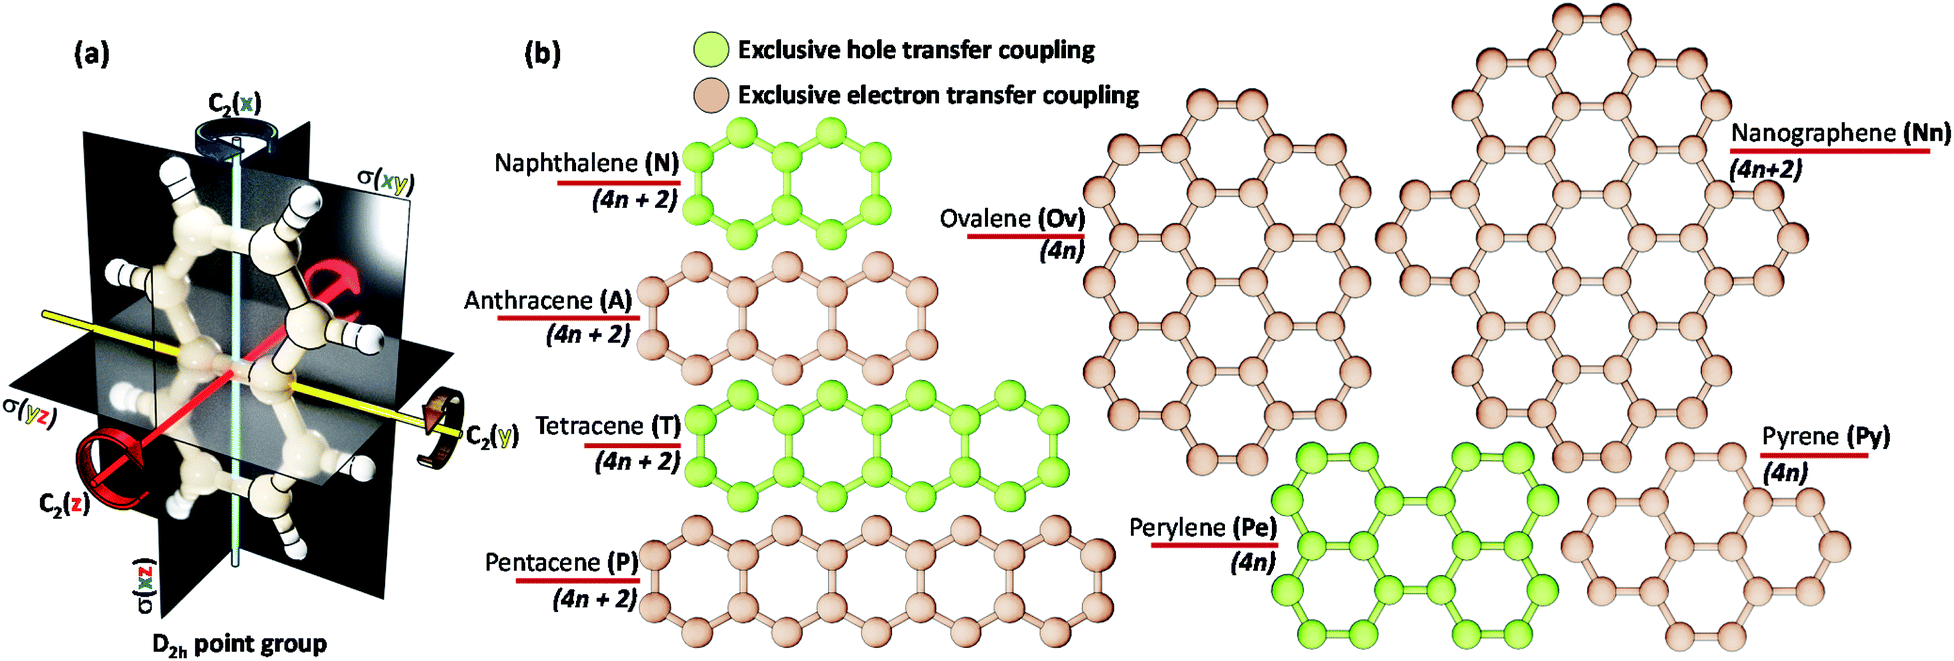 Mutually exclusive hole and electron transfer coupling in cross 